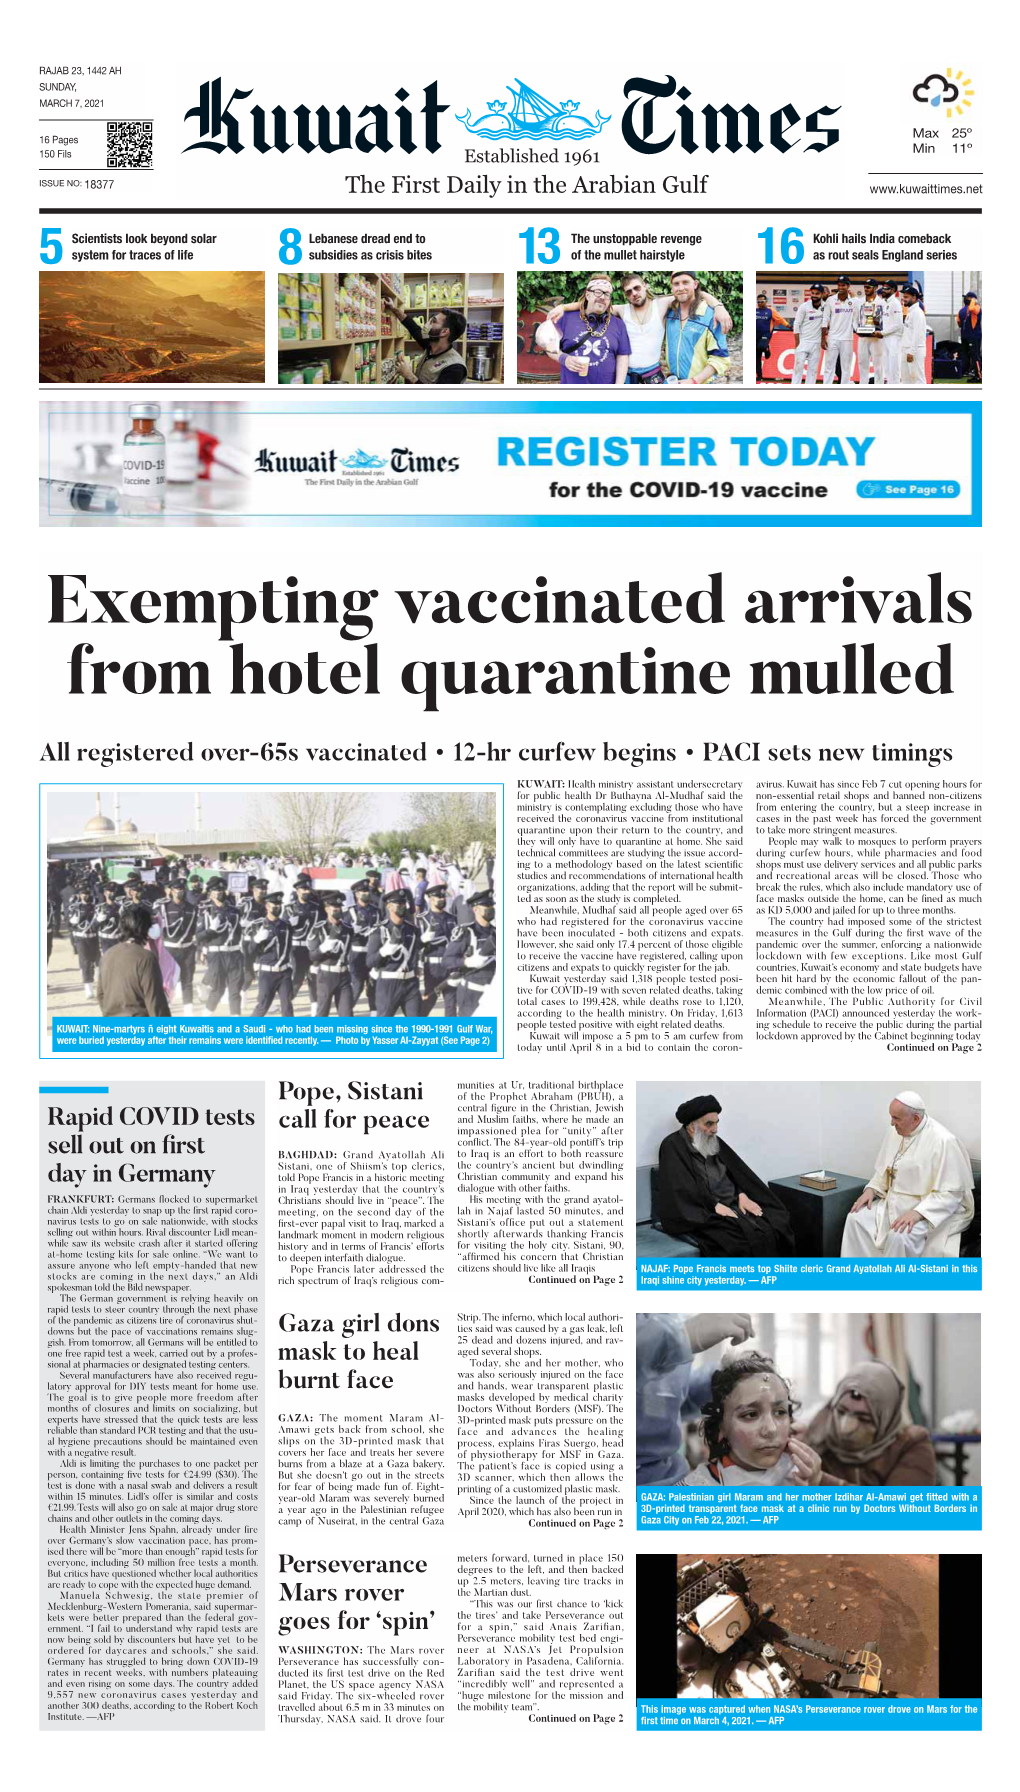 Exempting Vaccinated Arrivals from Hotel Quarantine Mulled